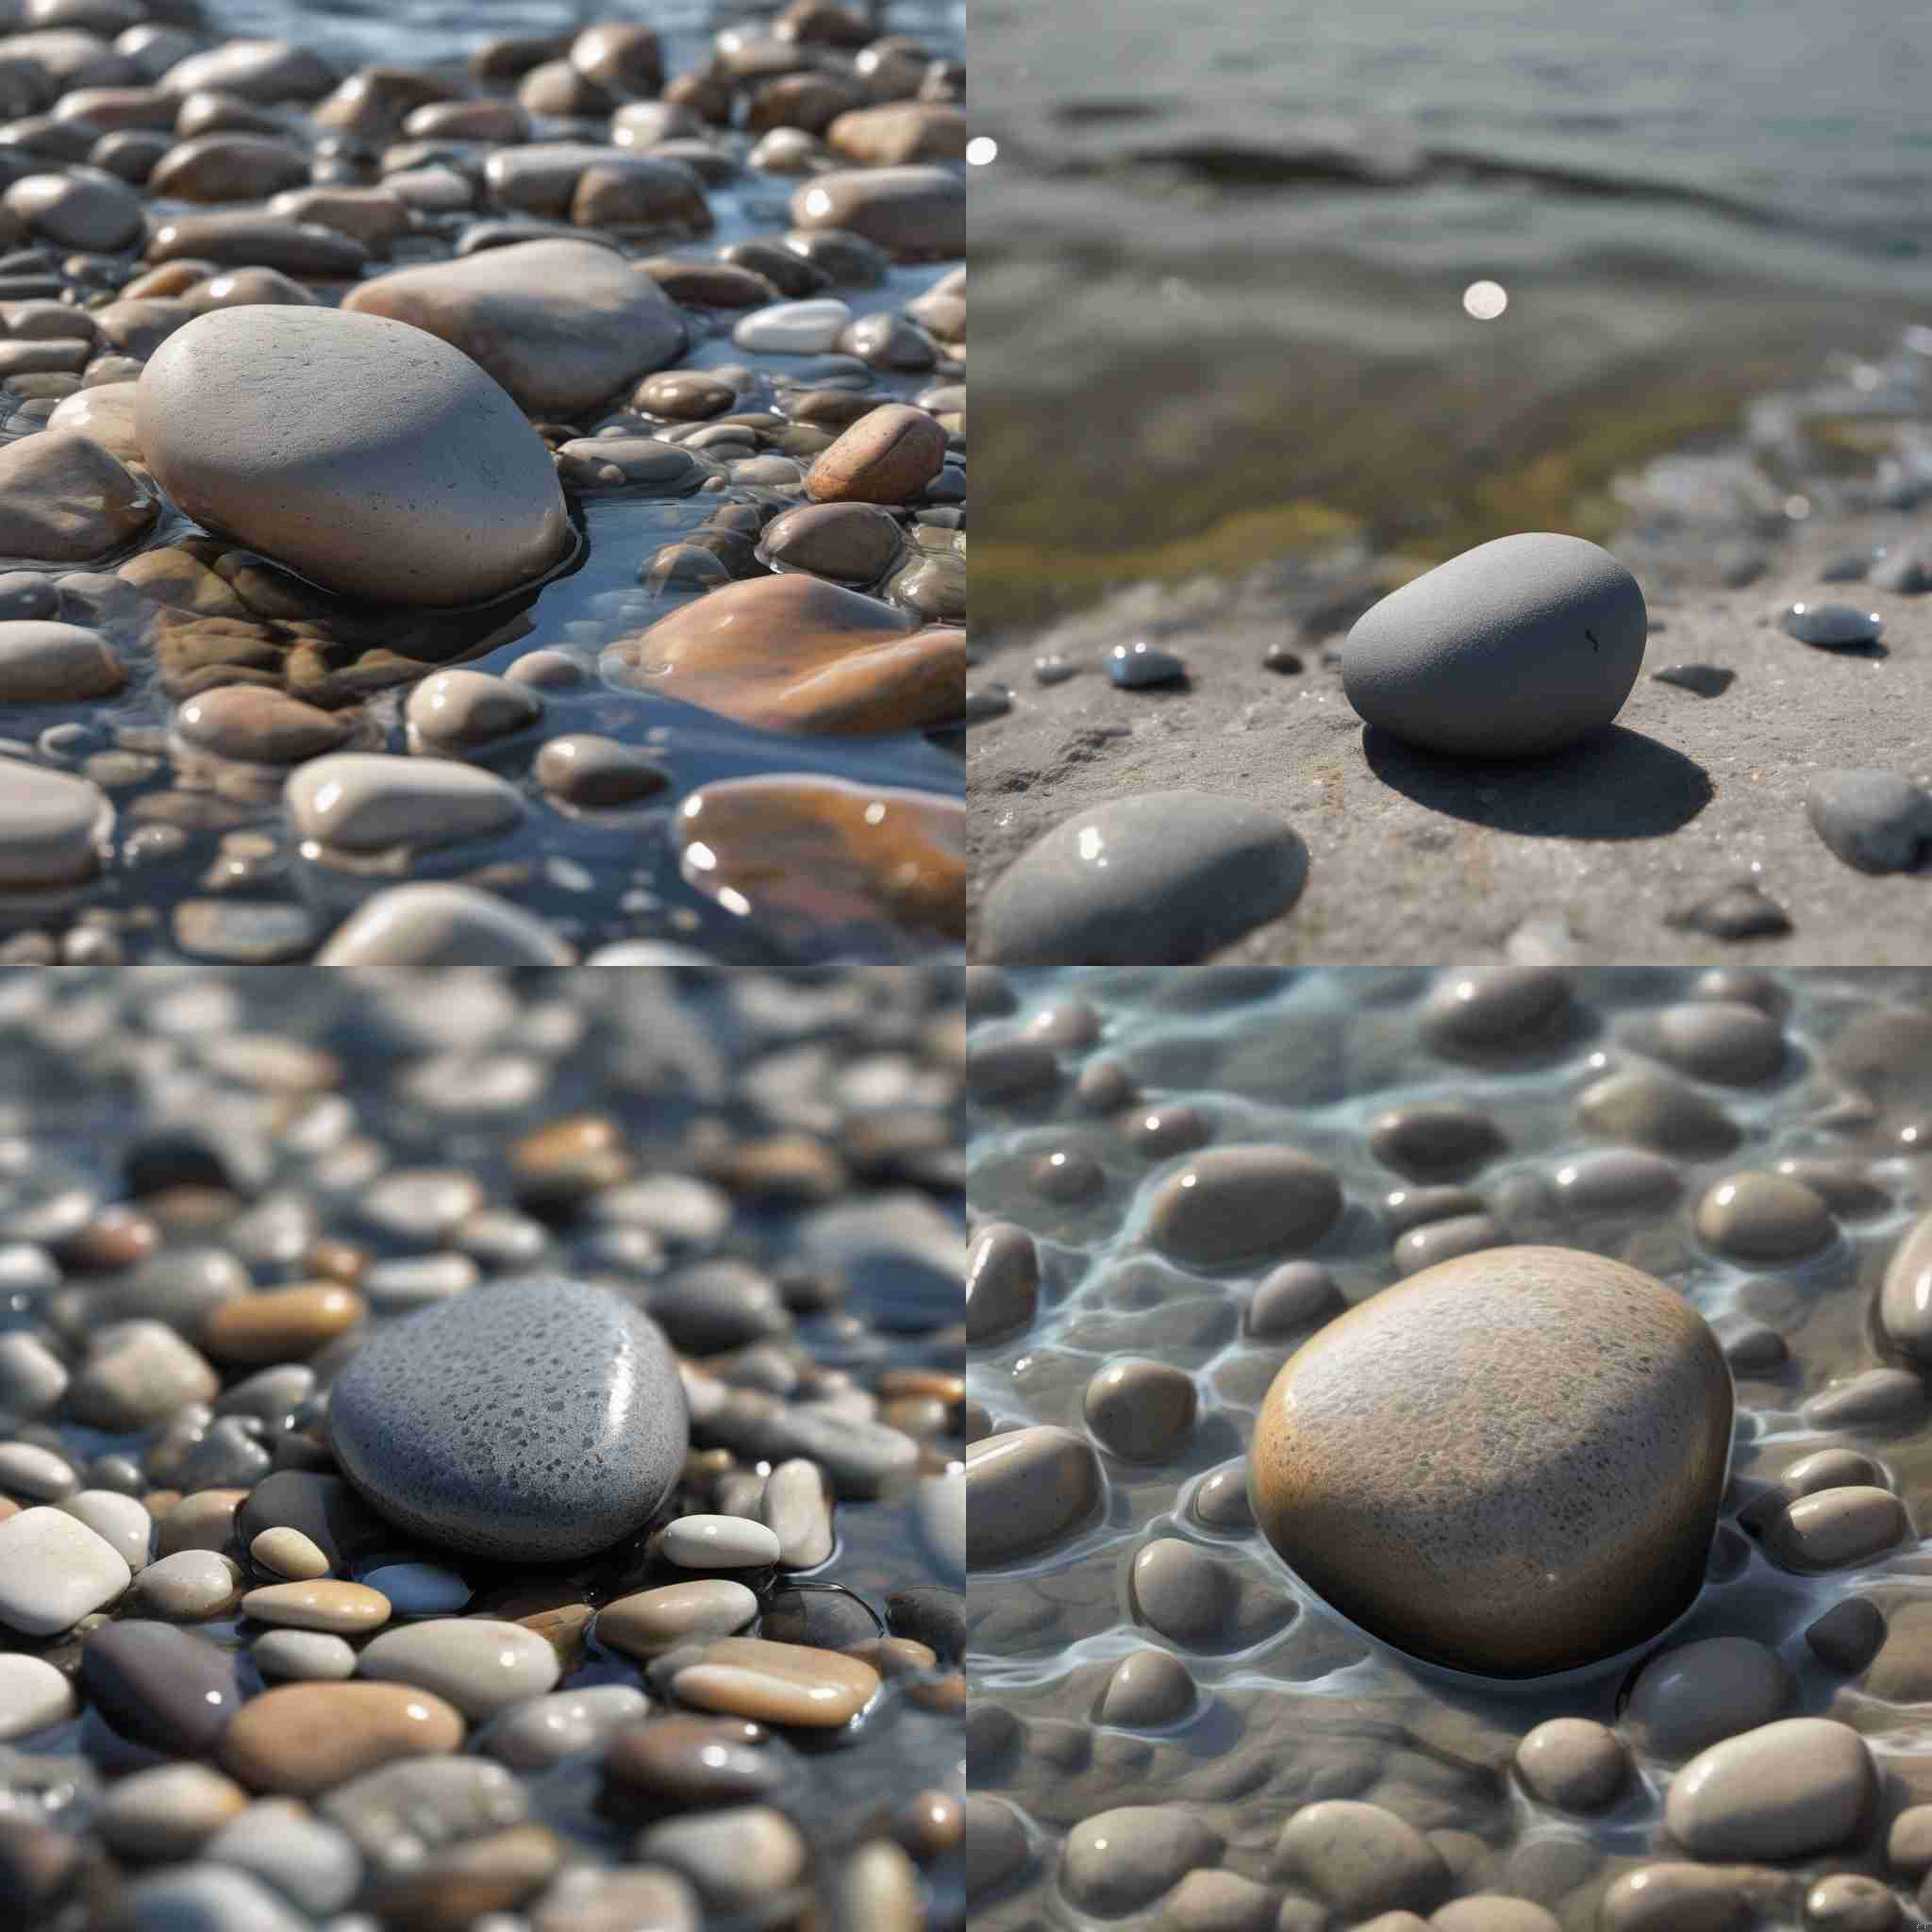 A pebble near the water